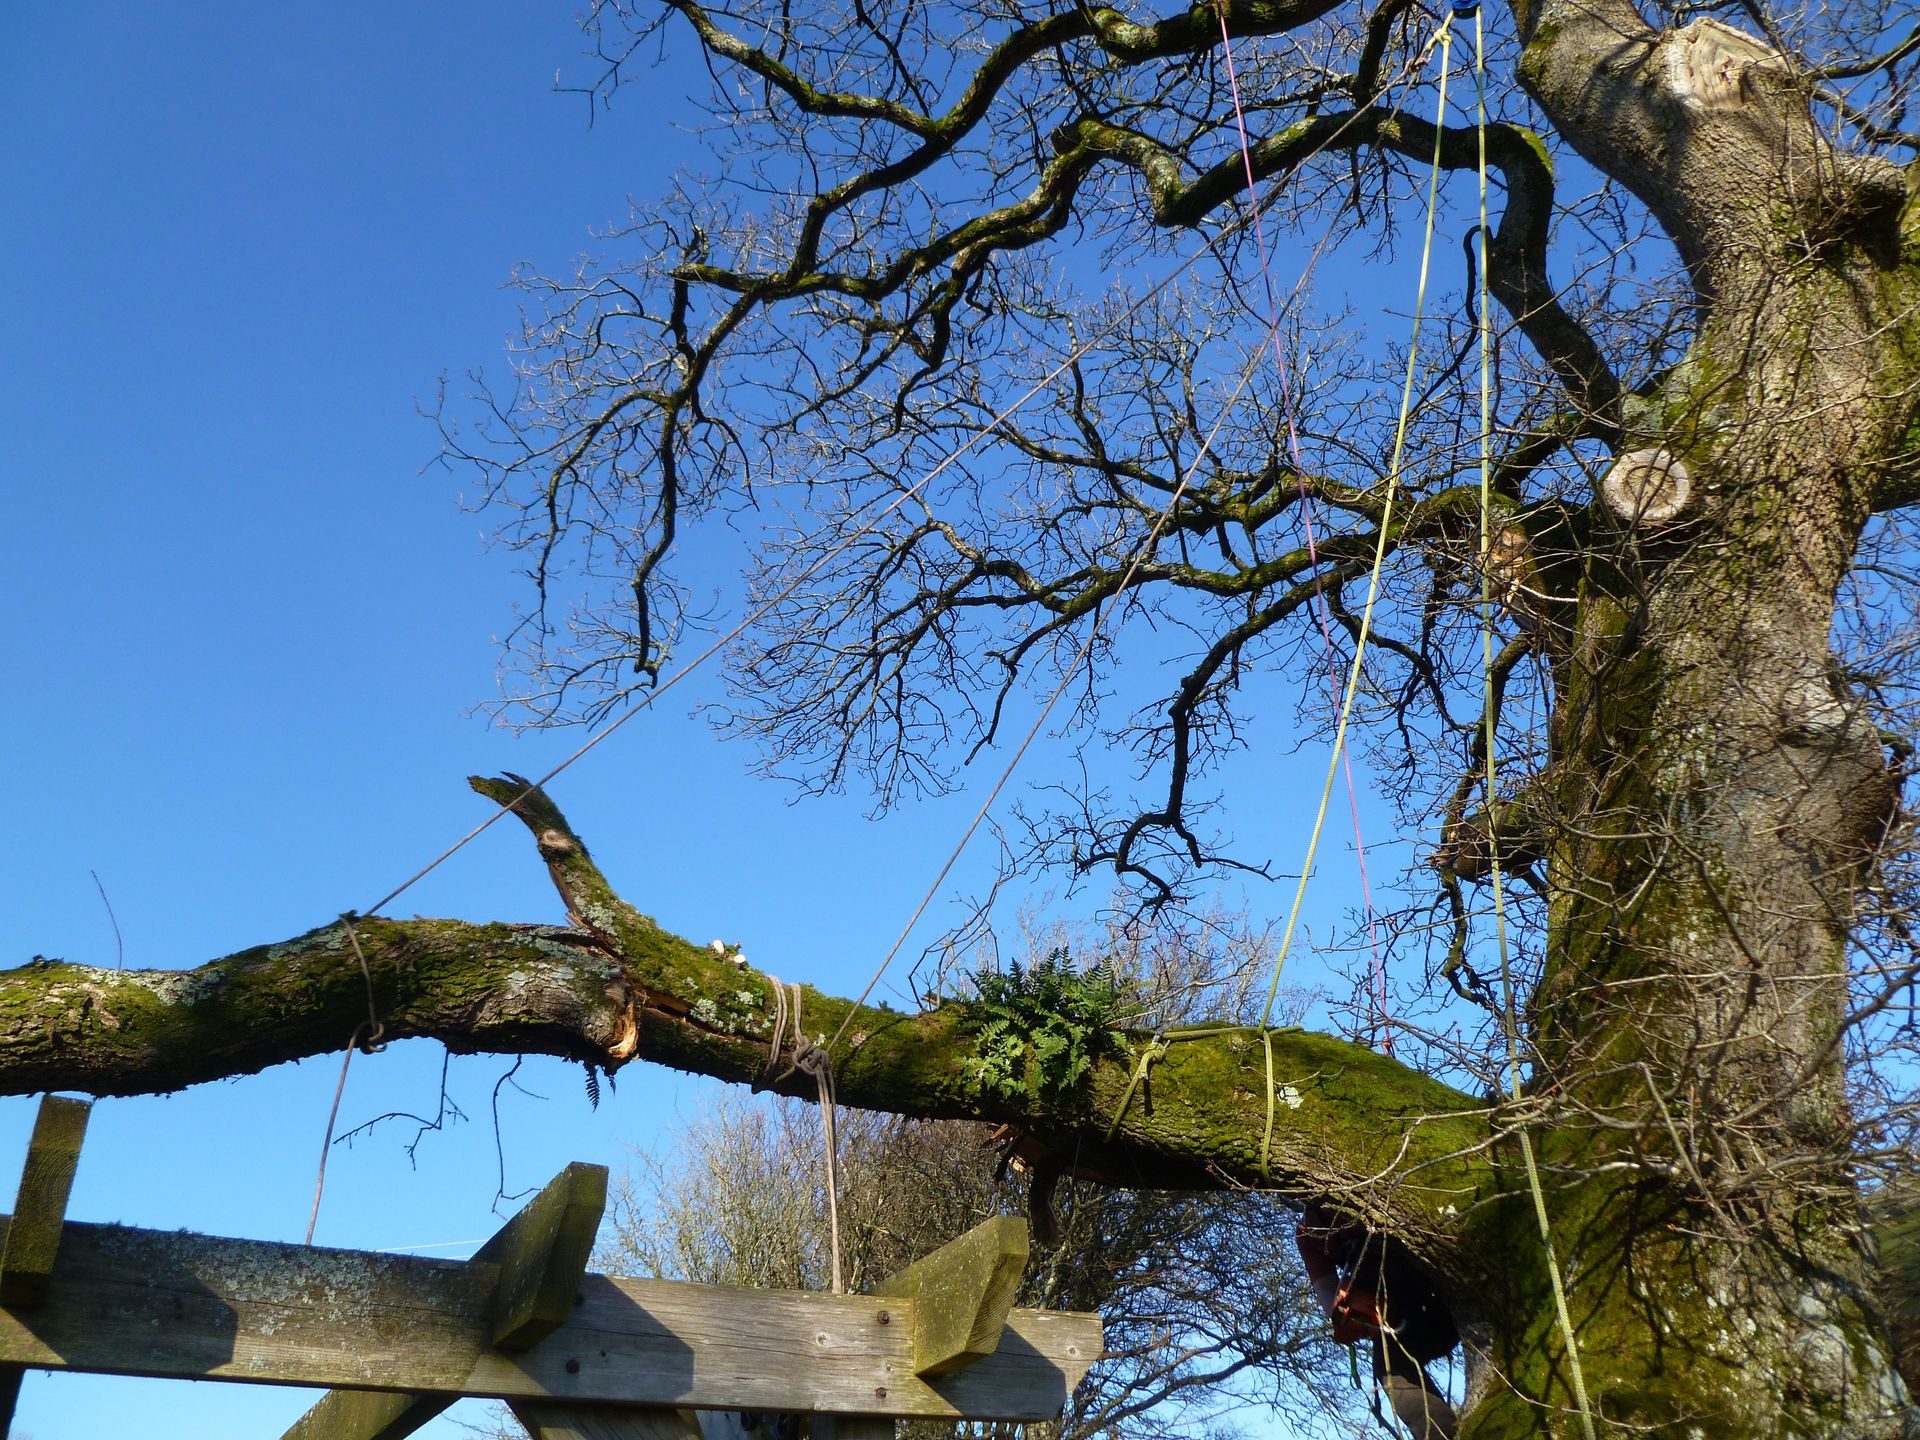 Several rigging and lowering ropes were used to secure the Oak tree branches in order to safely dismantle them.